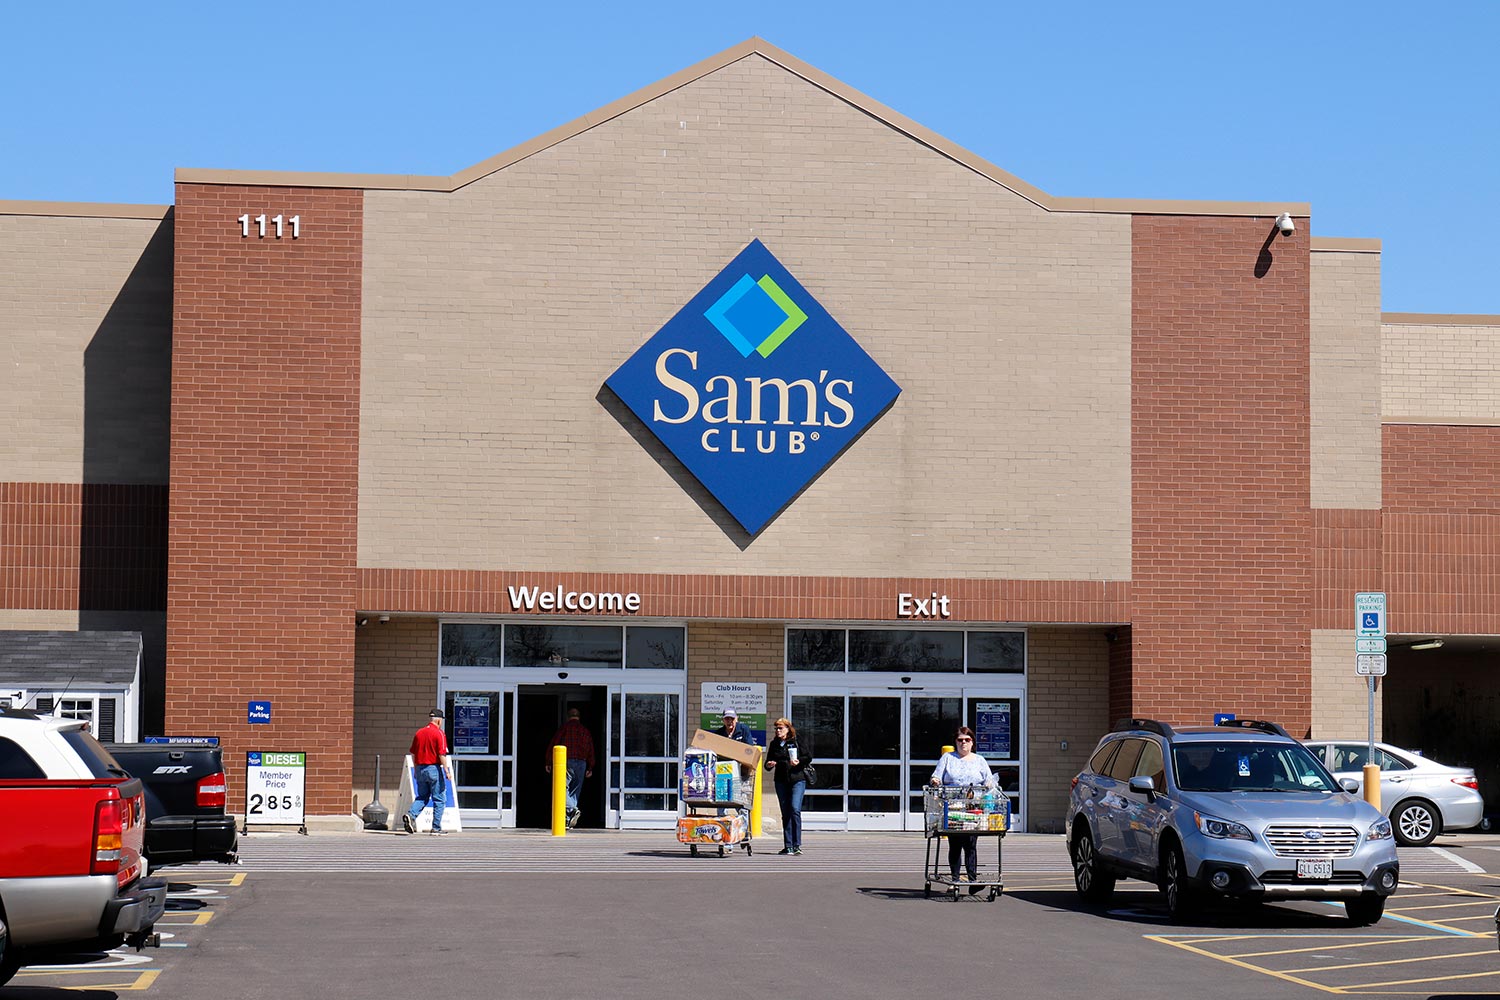 Sam's Club is a chain of membership only stores owned by Walmart II